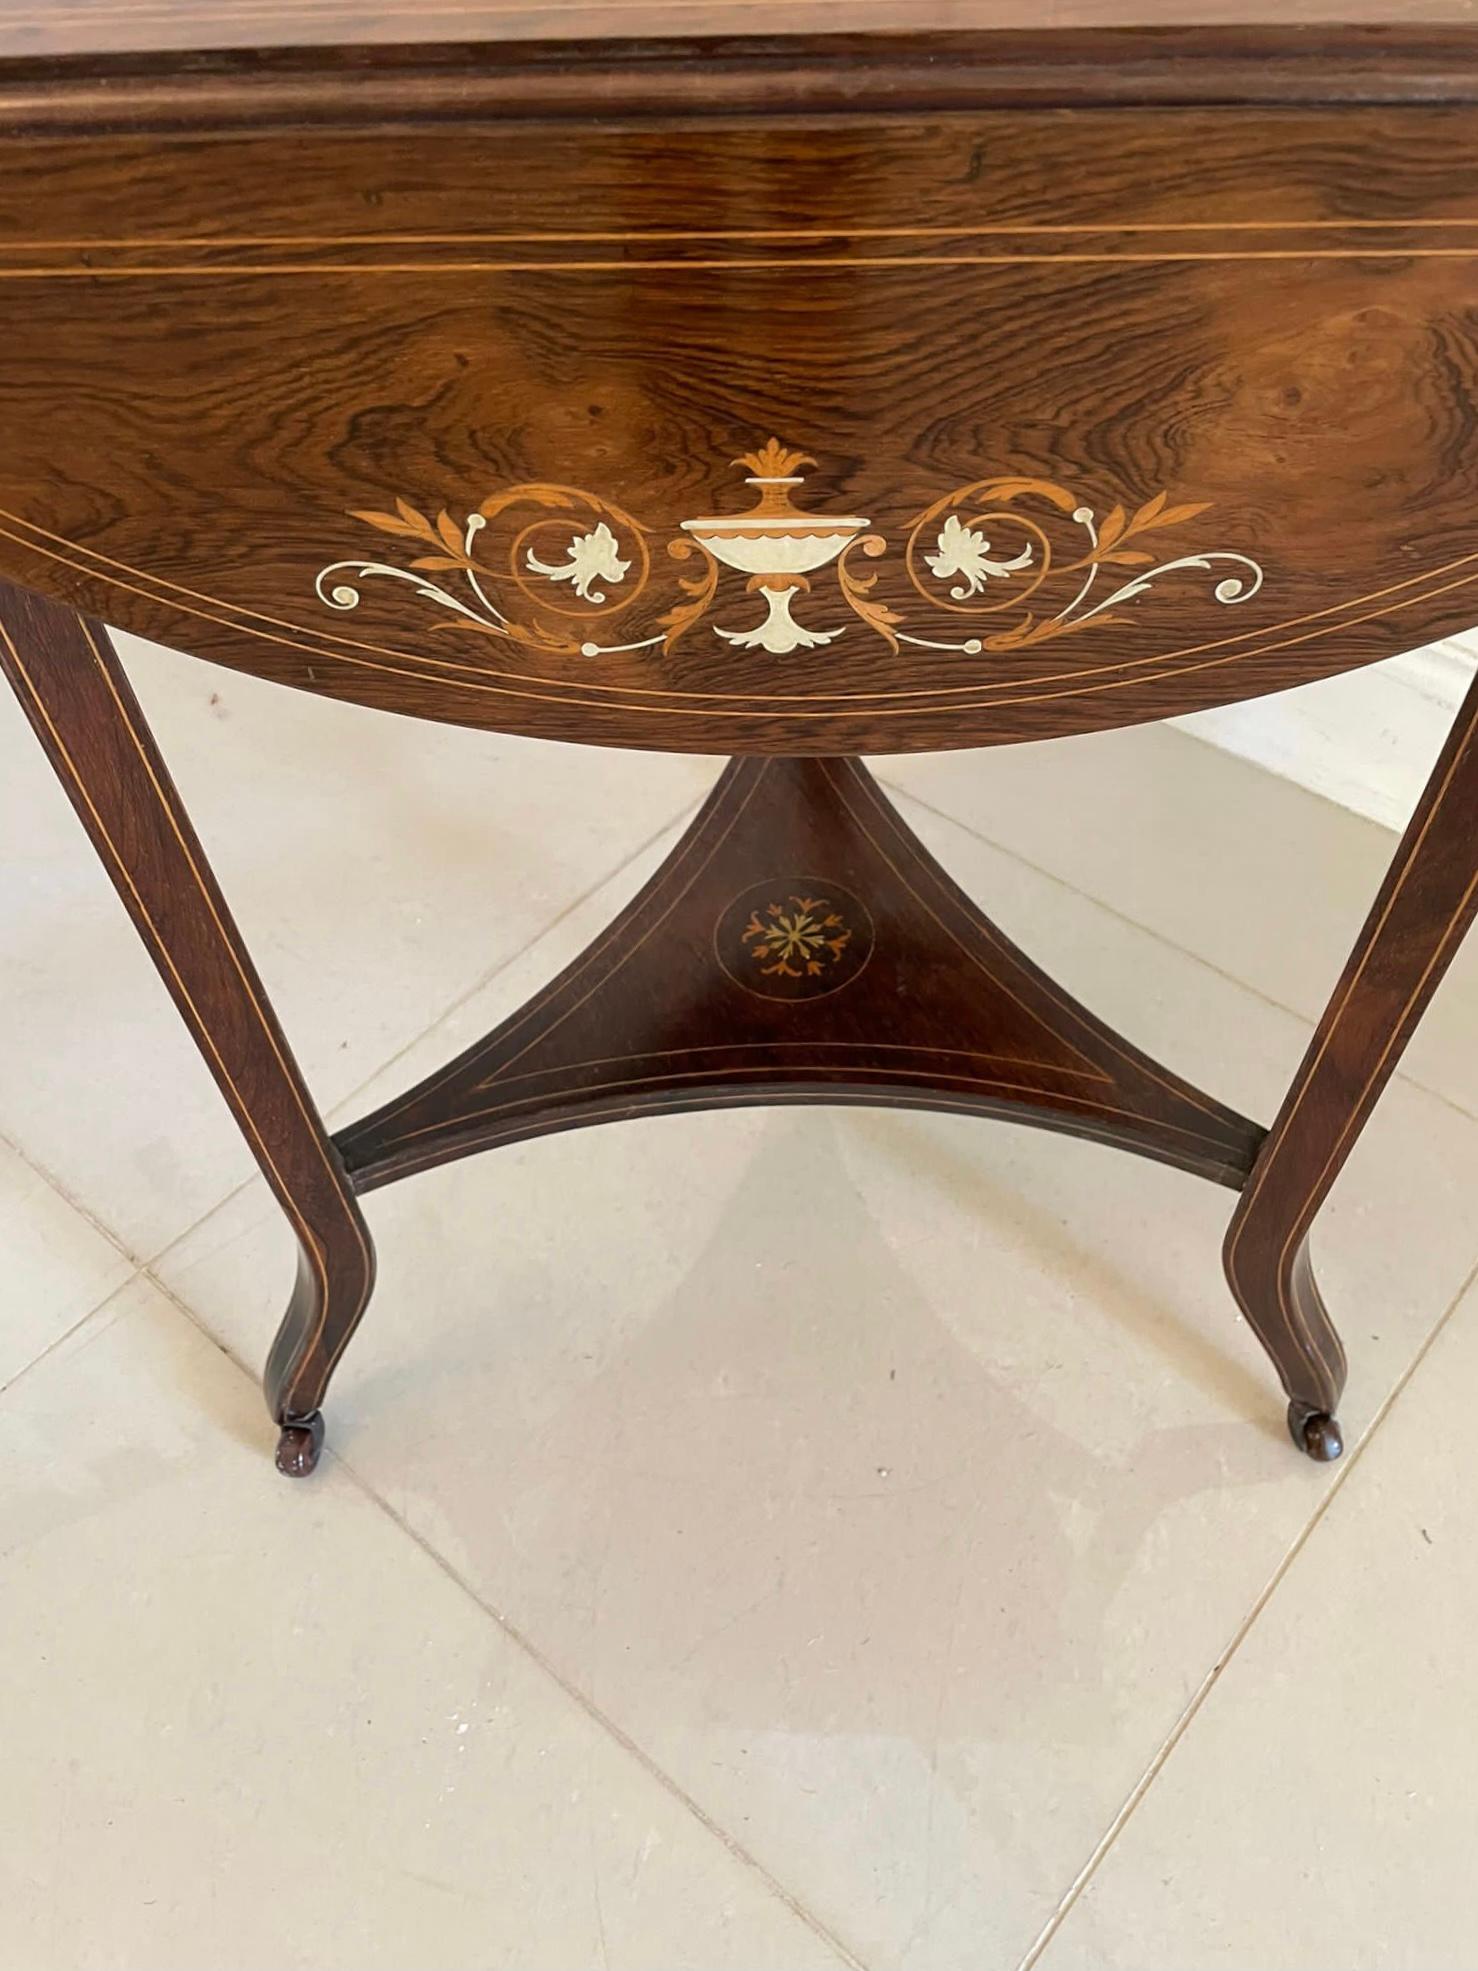 Unusual antique Edwardian quality rosewood inlaid drop leaf centre table having a quality attractive rosewood inlaid top with three shaped rosewood prettily inlaid drop leaves supported by three square tapering inlaid legs with shaped feet united by